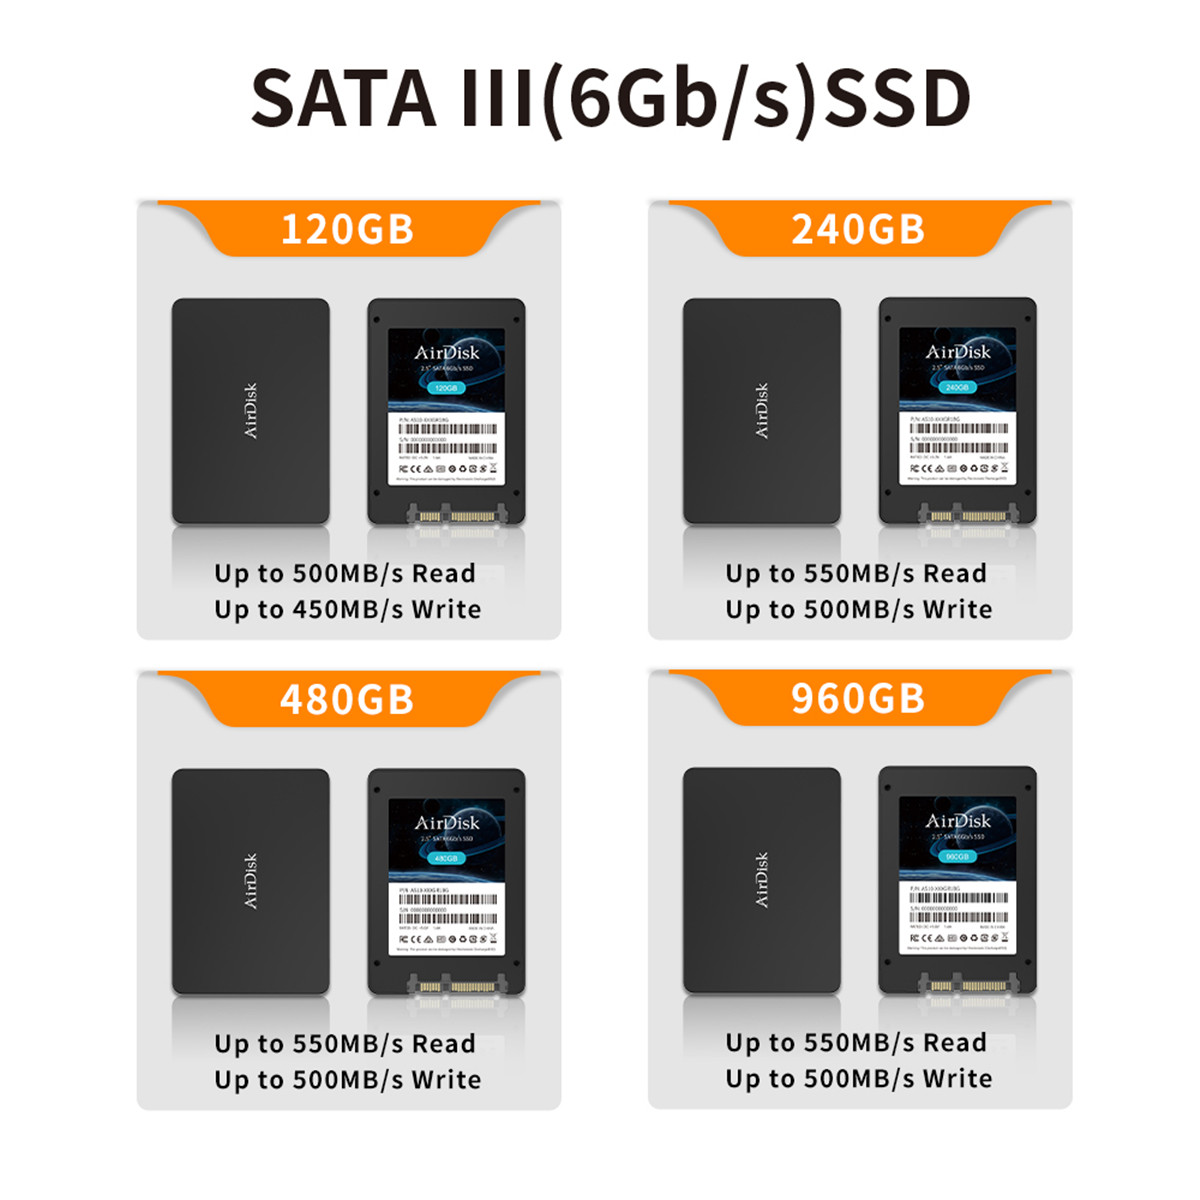 Airdisk 120GB S10 SATA 3 2.5" Internal SSD - 2 years warranty, Up to 550MB/s read, Black, local PH release, AS10X-120GB1G